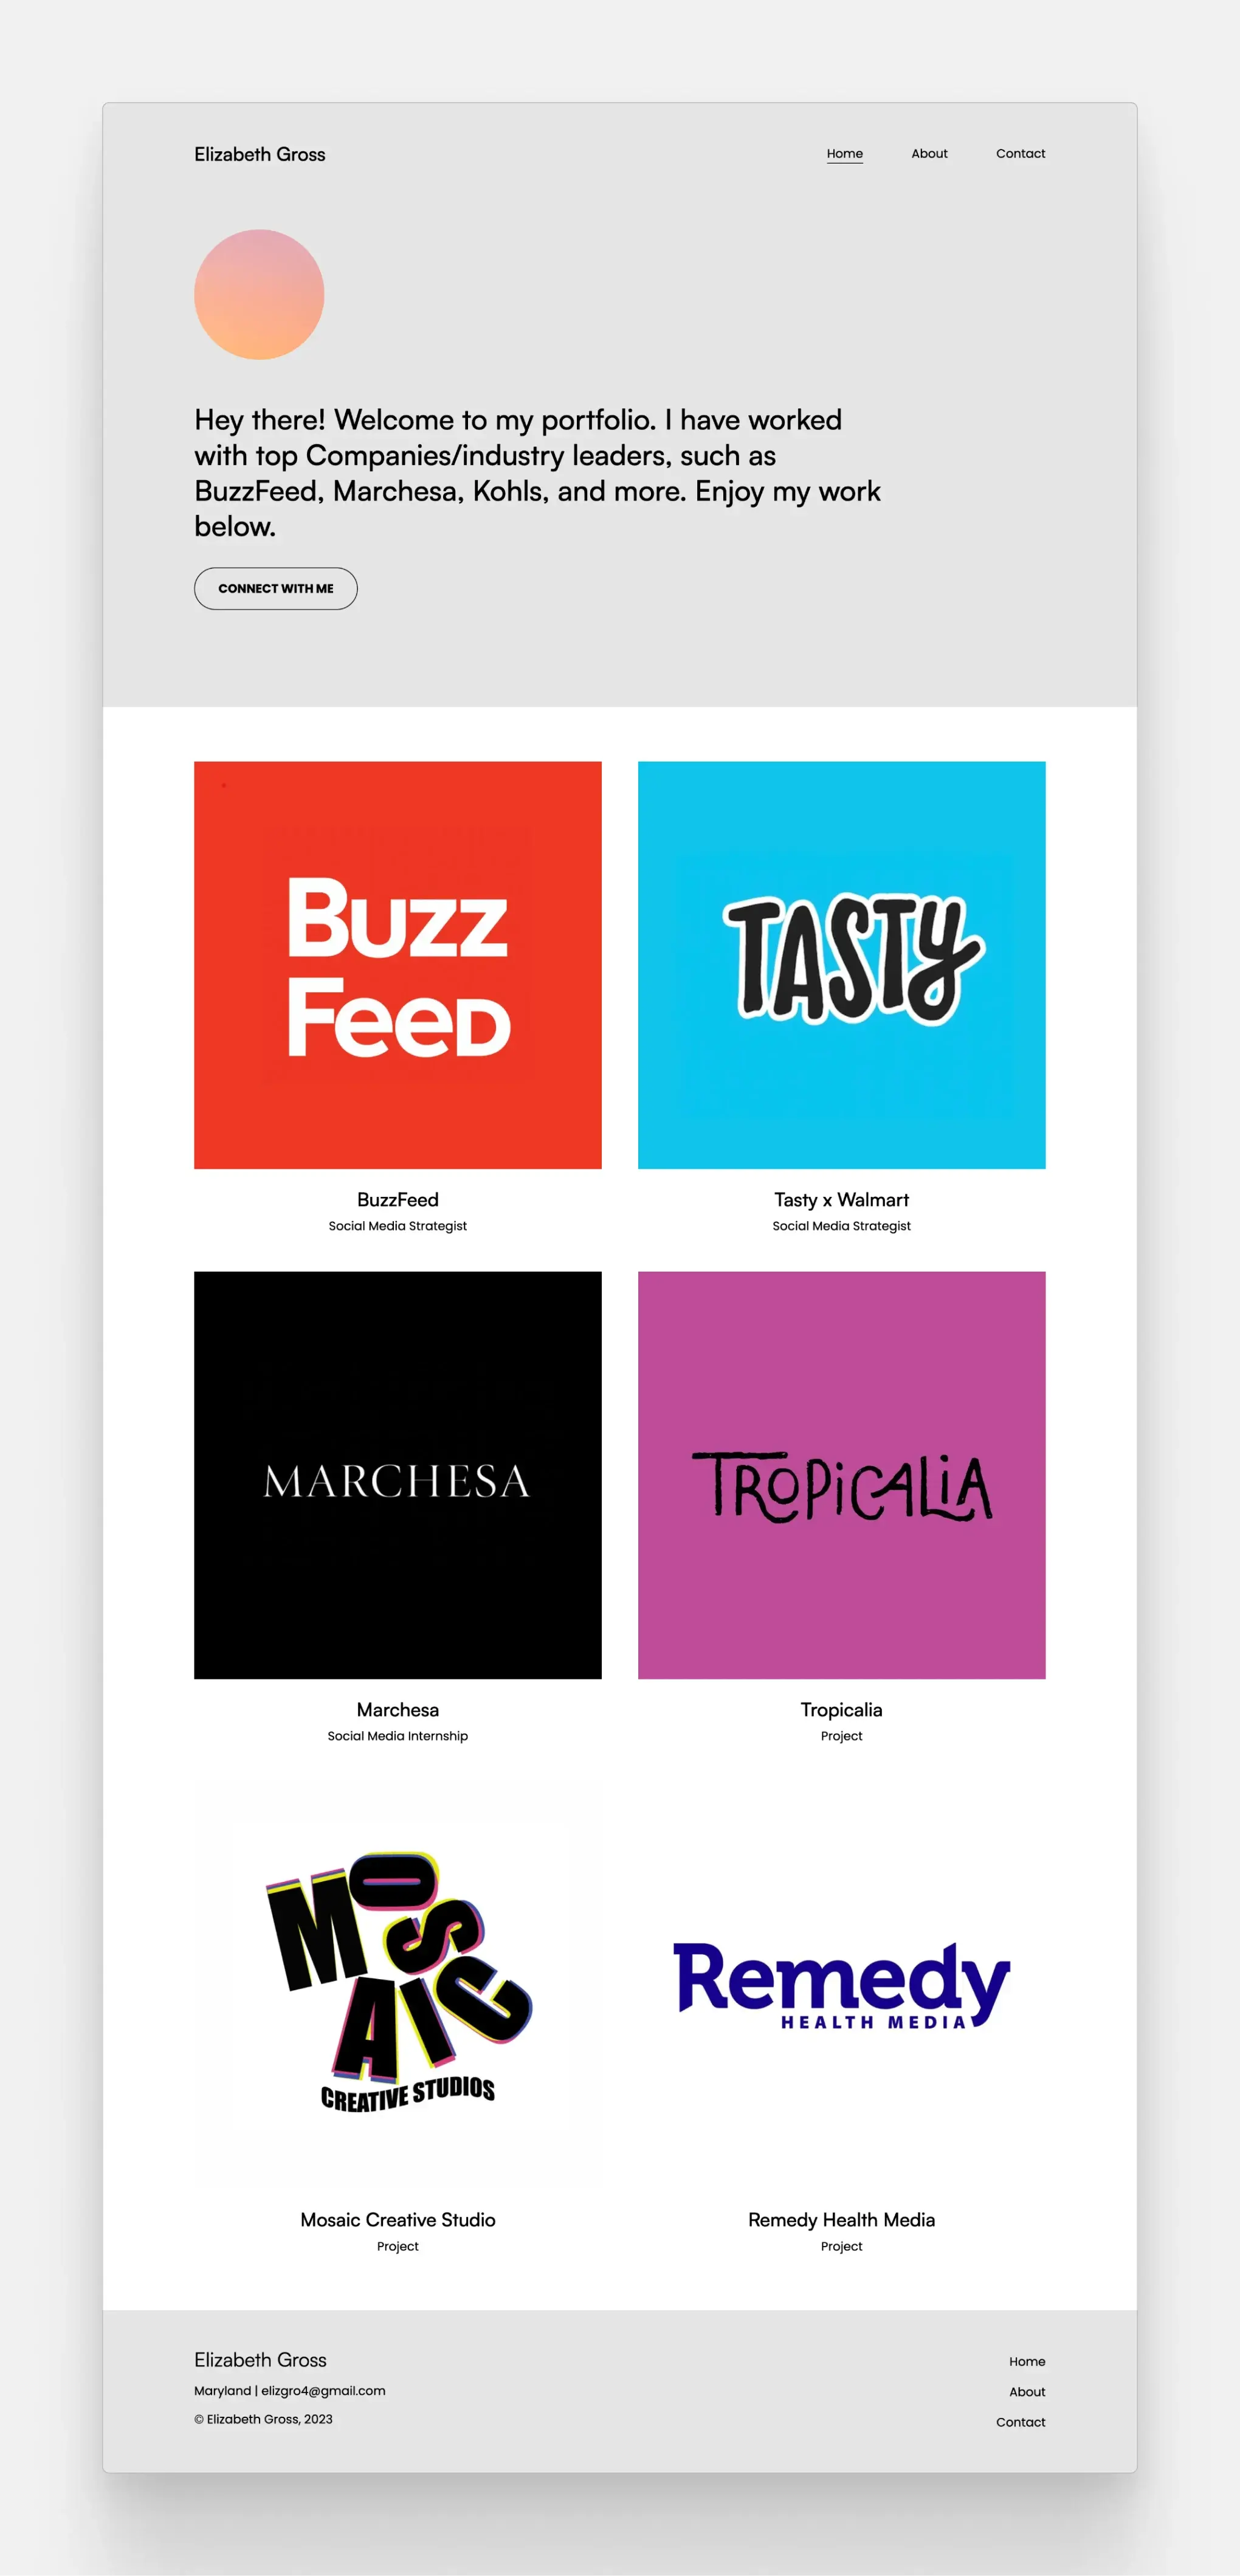 The social media portfolio website of Elizabeth Gross, featuring project thumbnails on the homepage, of well-known brands like BuzzFeed, Tasty, or Marchesa.